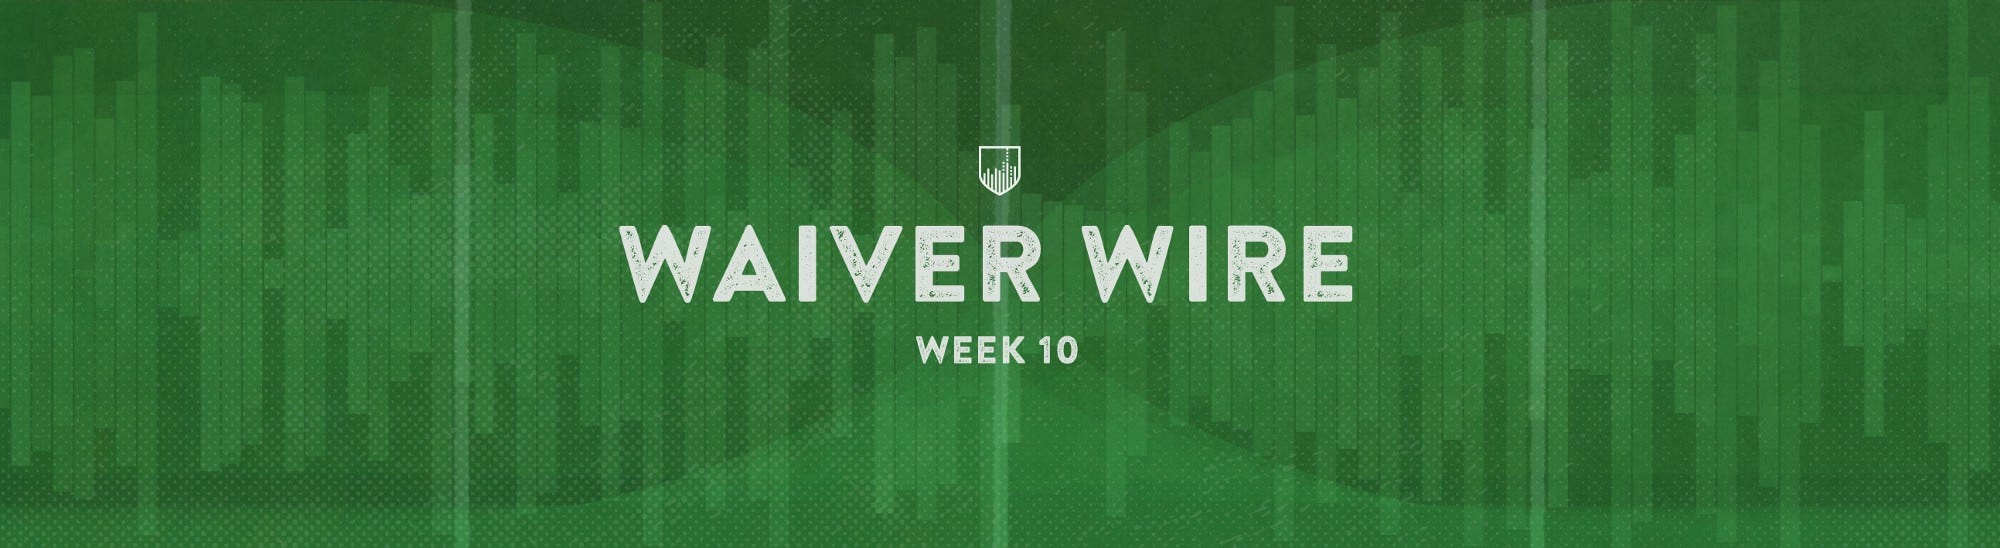 Waiver-Wire-a-Week-Ahead Advice for Fantasy Football Week 10 based on  Machine Learning | by Chris Seal | Fantasy Outliers | Medium